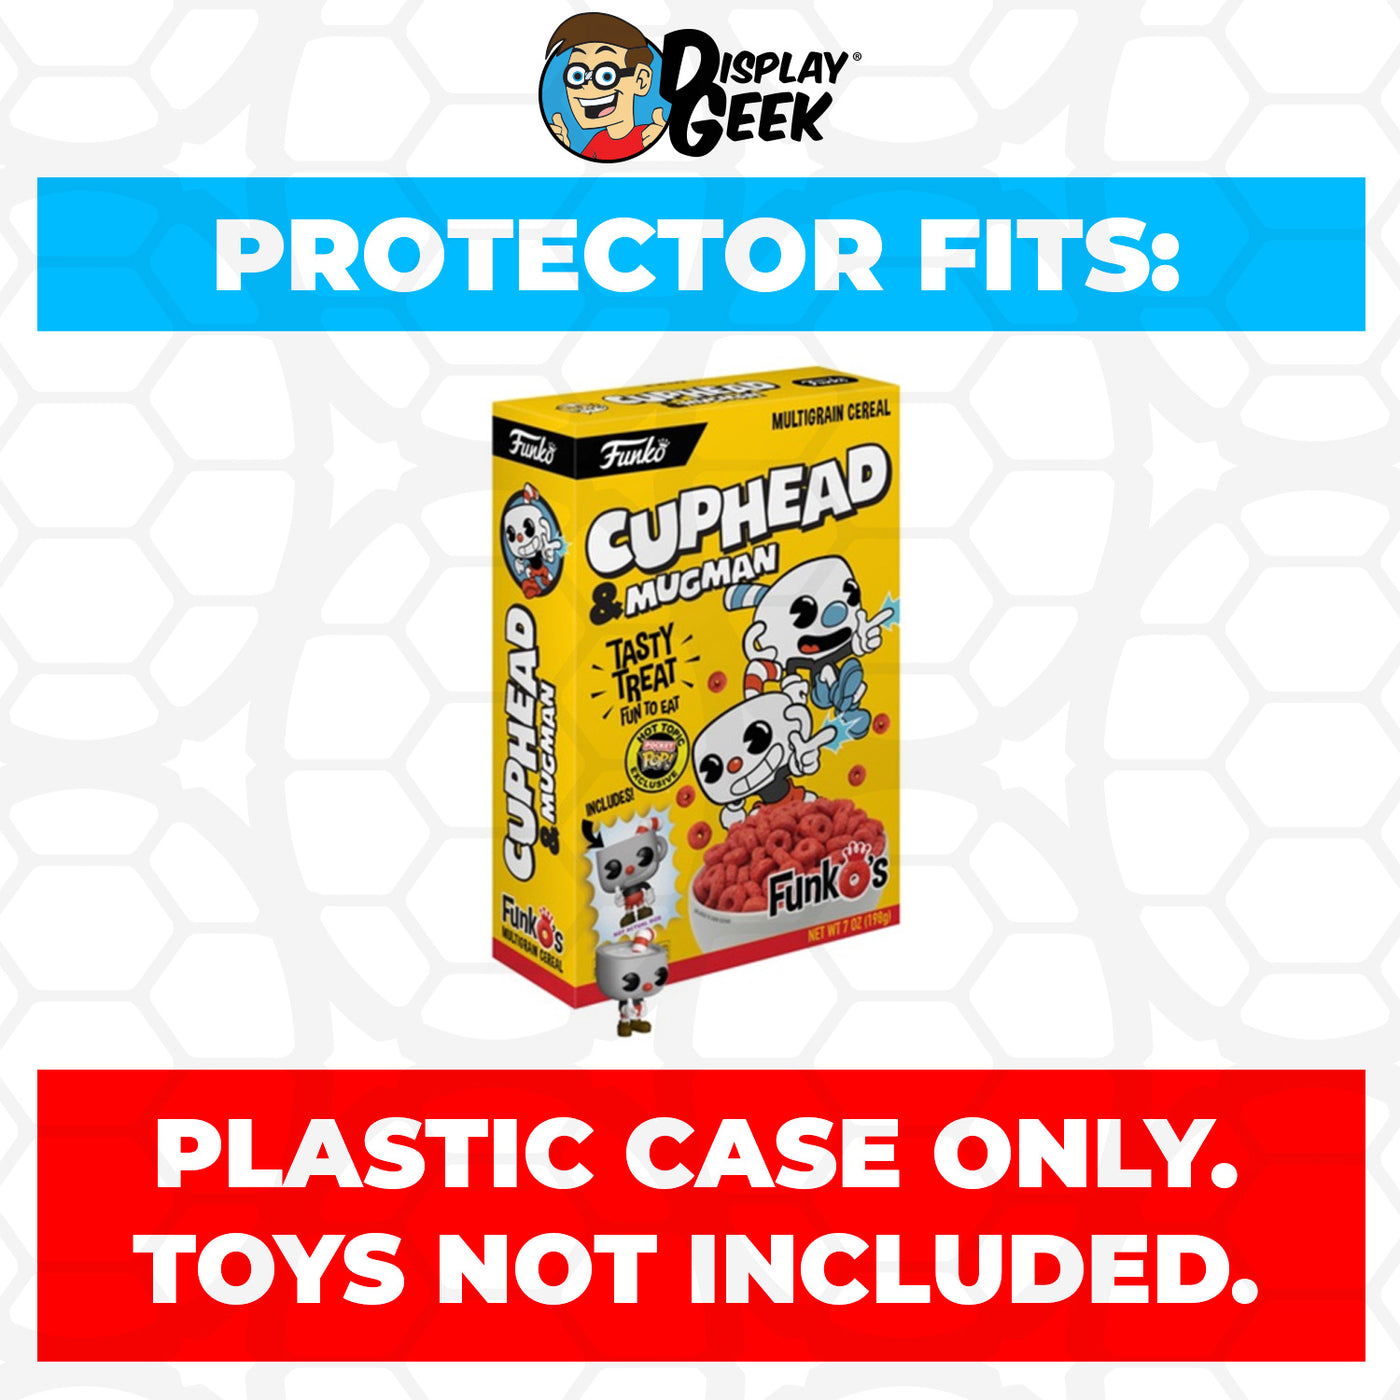 Pop Protector for Cuphead & Mugman FunkO's Cereal Box on The Protector Guide App by Display Geek